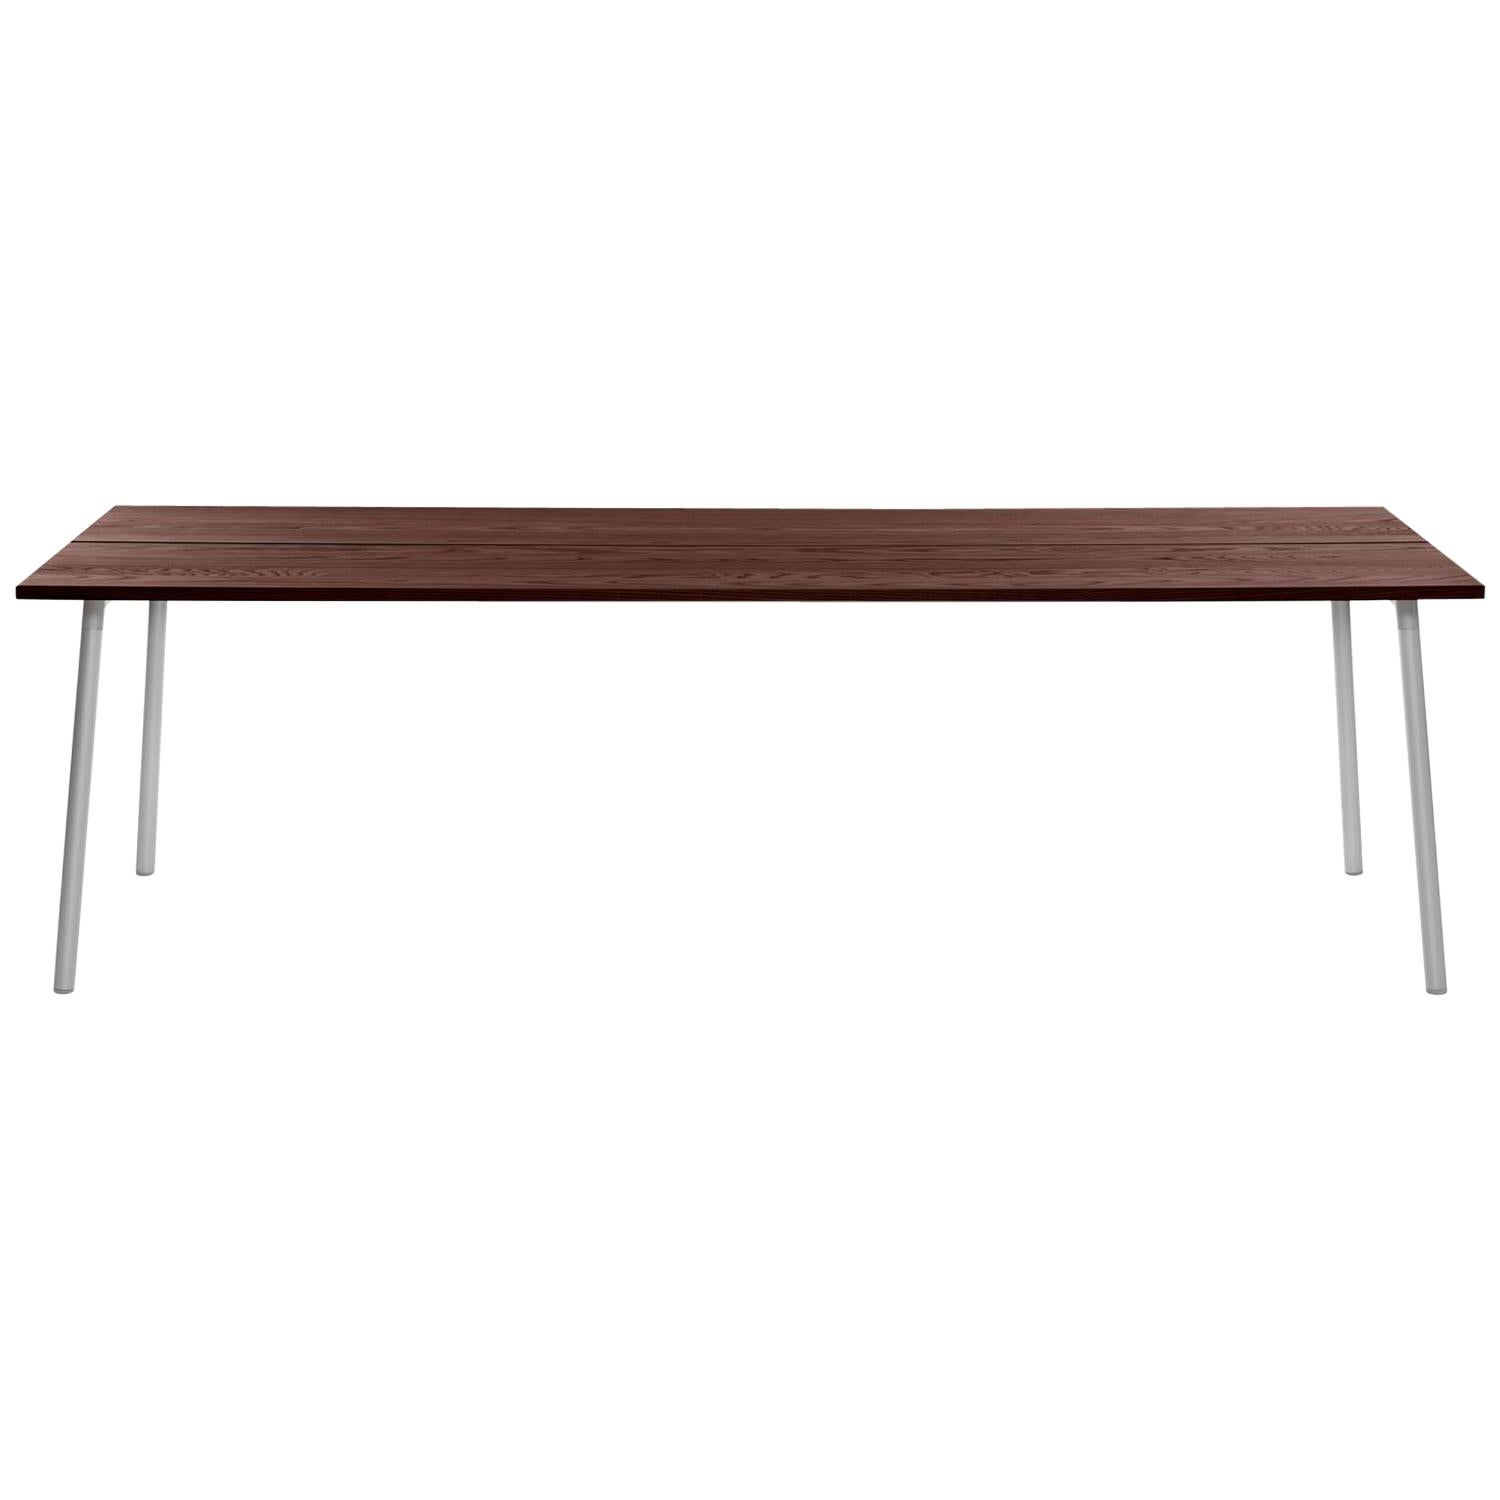 Emeco Run Extra Large Table in Aluminum and Walnut by Sam Hecht + Kim Colin For Sale